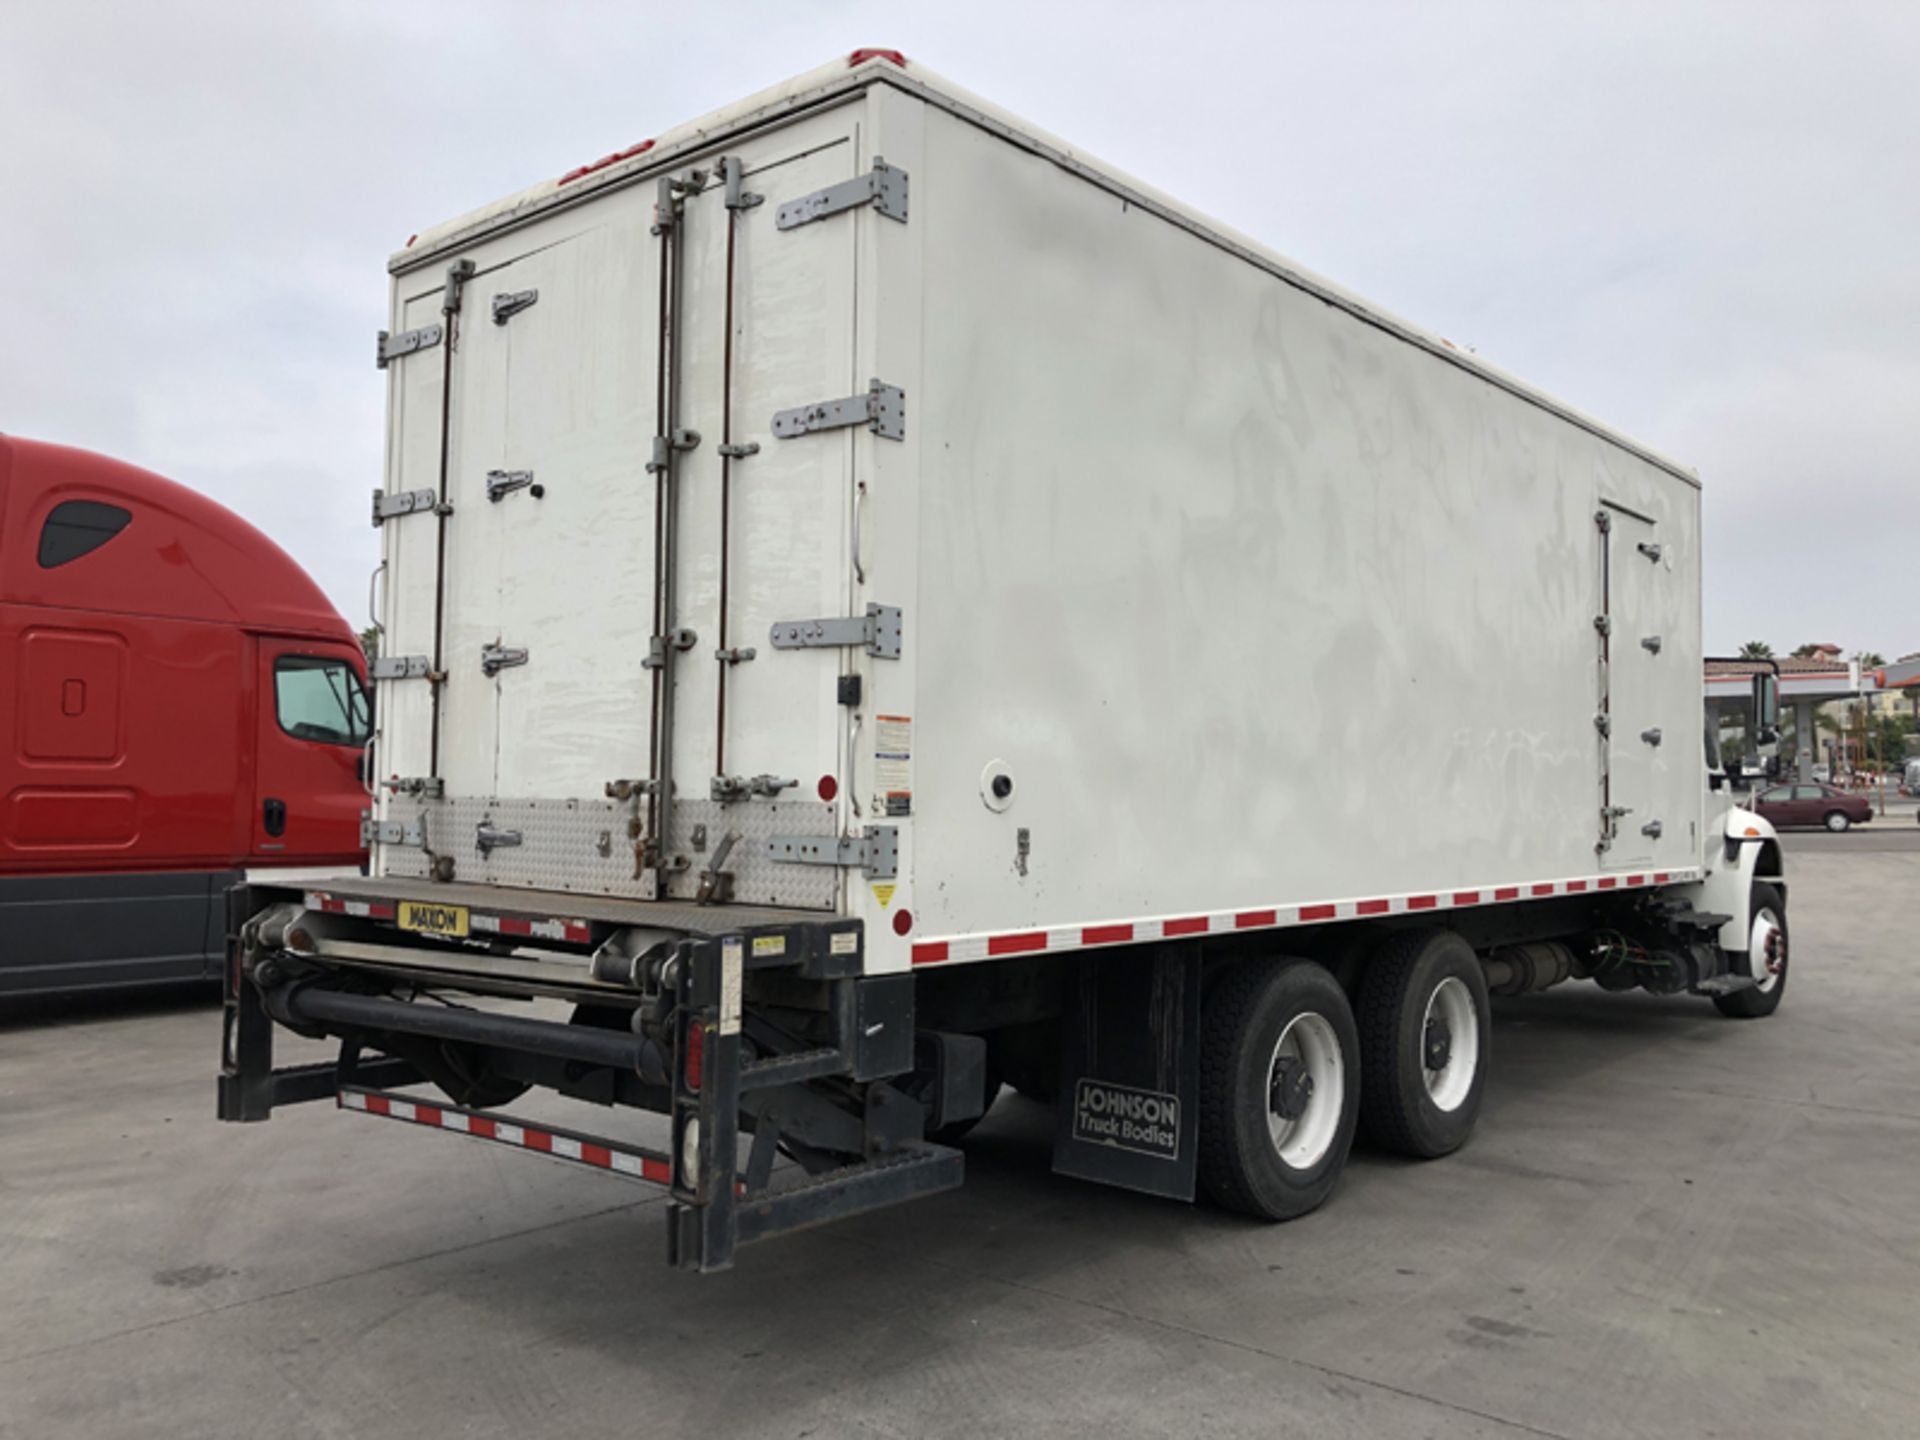 2018 INTERNATIONAL 4400 SBA 6X4 REFRIGERATED BOX TRUCK VIN#: 1HTMSTAR0JH529609, Approx Miles: 65133, - Image 4 of 10